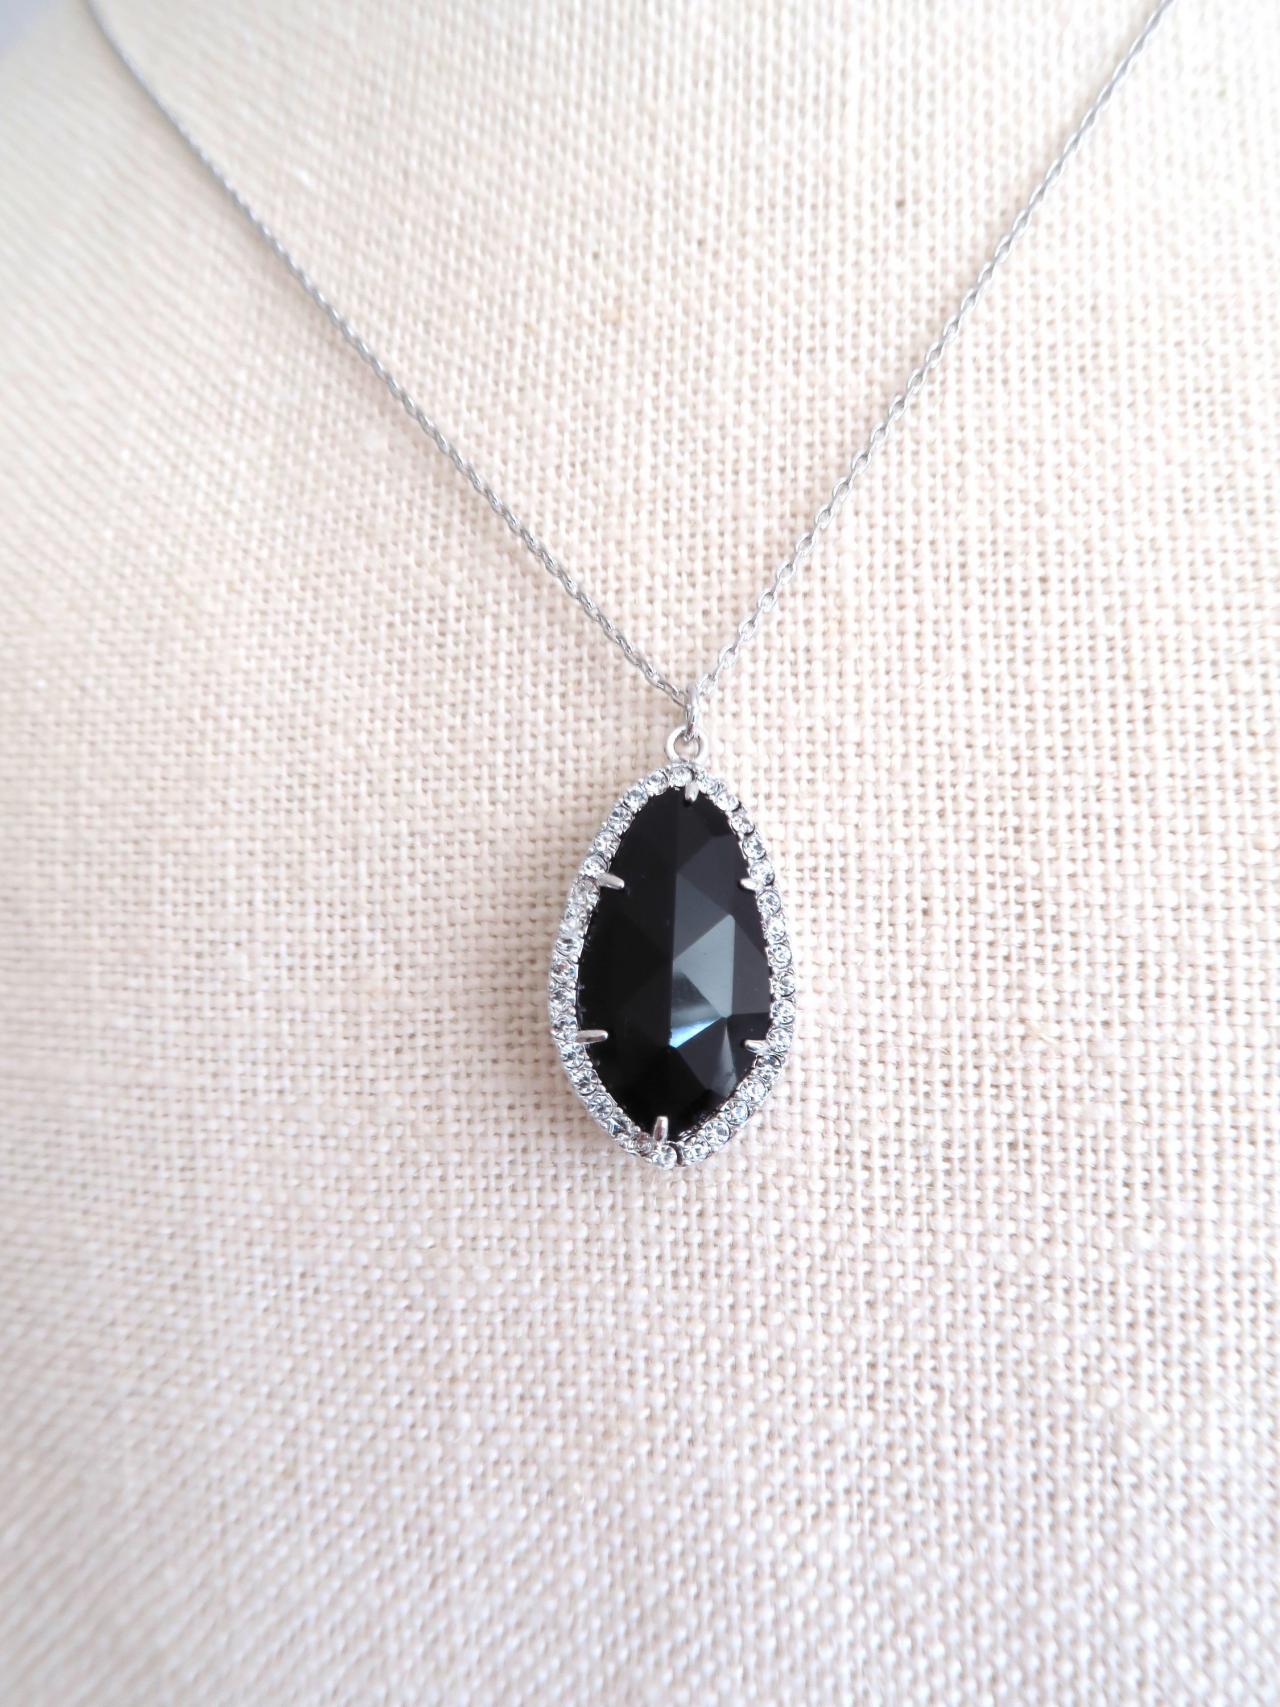 Cloudy Charcoal Teardrop Necklace Cloudy Black Crystal Charm Necklace Back Wedding Necklace Bridesmaids Gift Birthday Gift (n013)